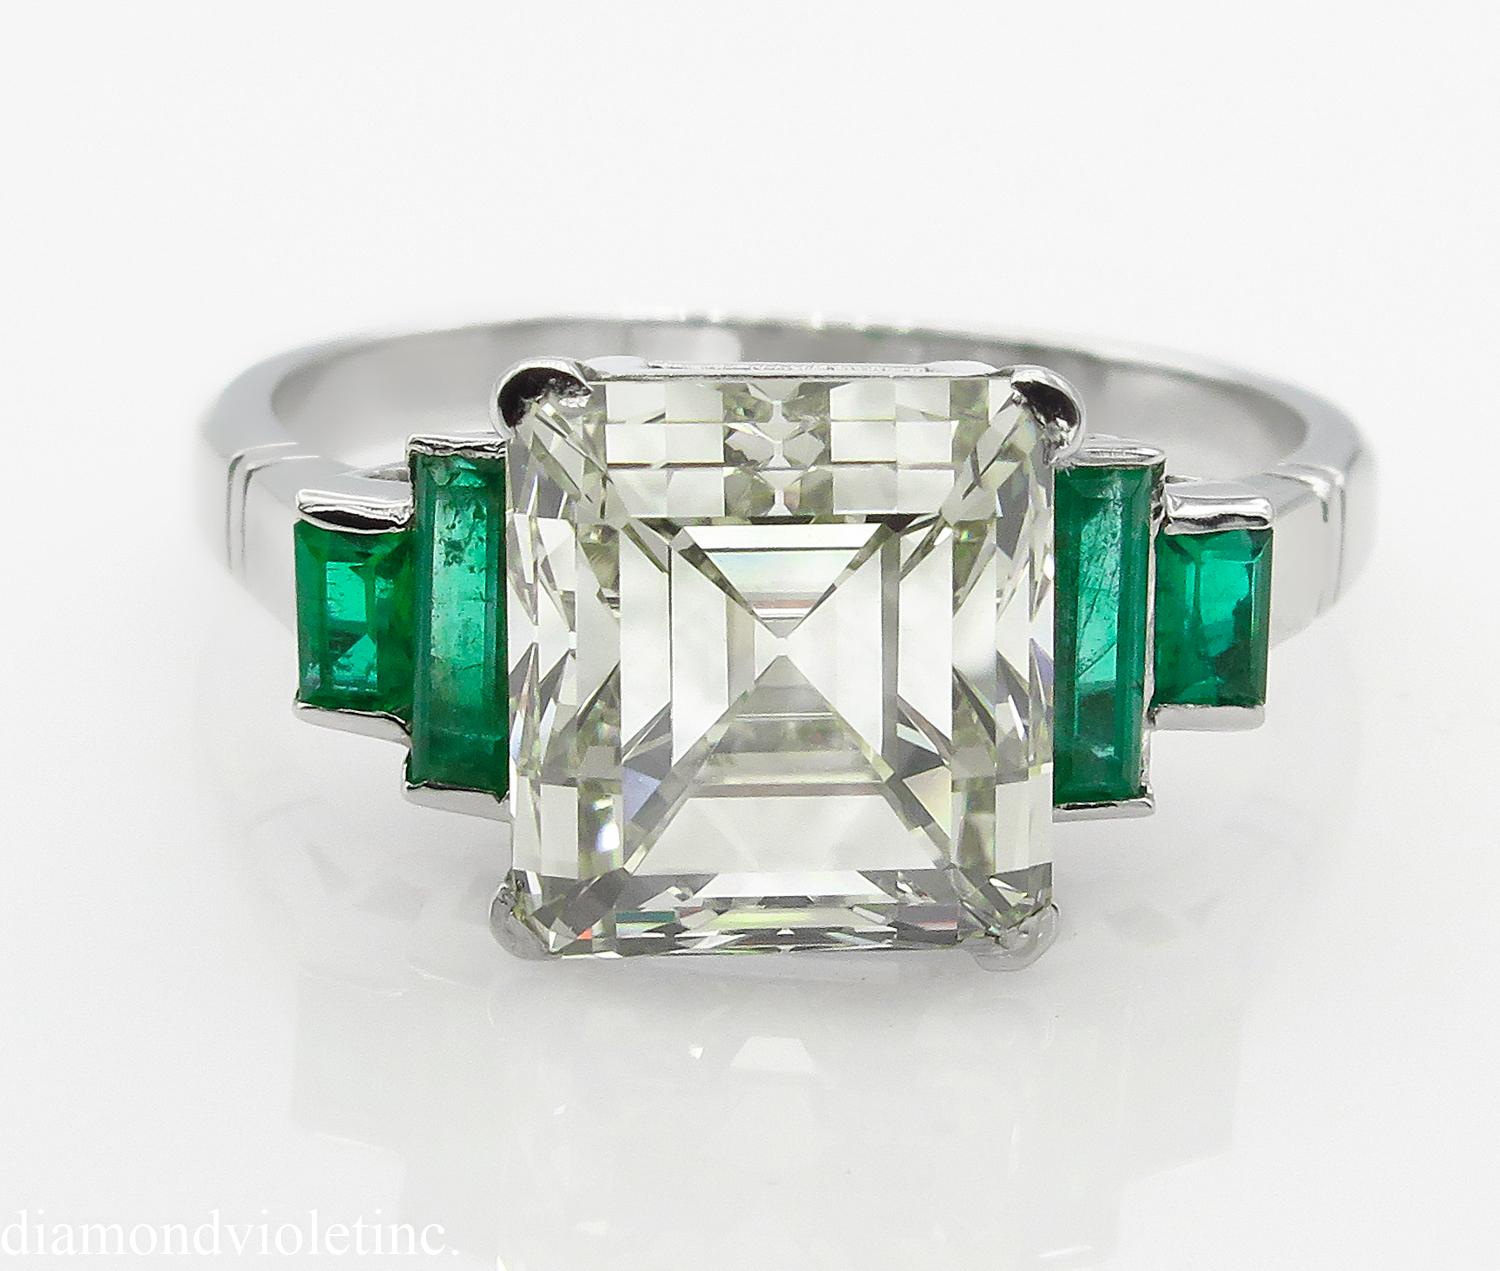 A Timeless Elegant Estate Vintage Diamond Engagement Ring with EG USA Certified 3.91ct Step cut Square Emerald Center Diamond in L-M color VS2 clarity (Very Clean); with measurements of 8.57x7.97x6.31mm; appears much LARGER than its size!!
It is set